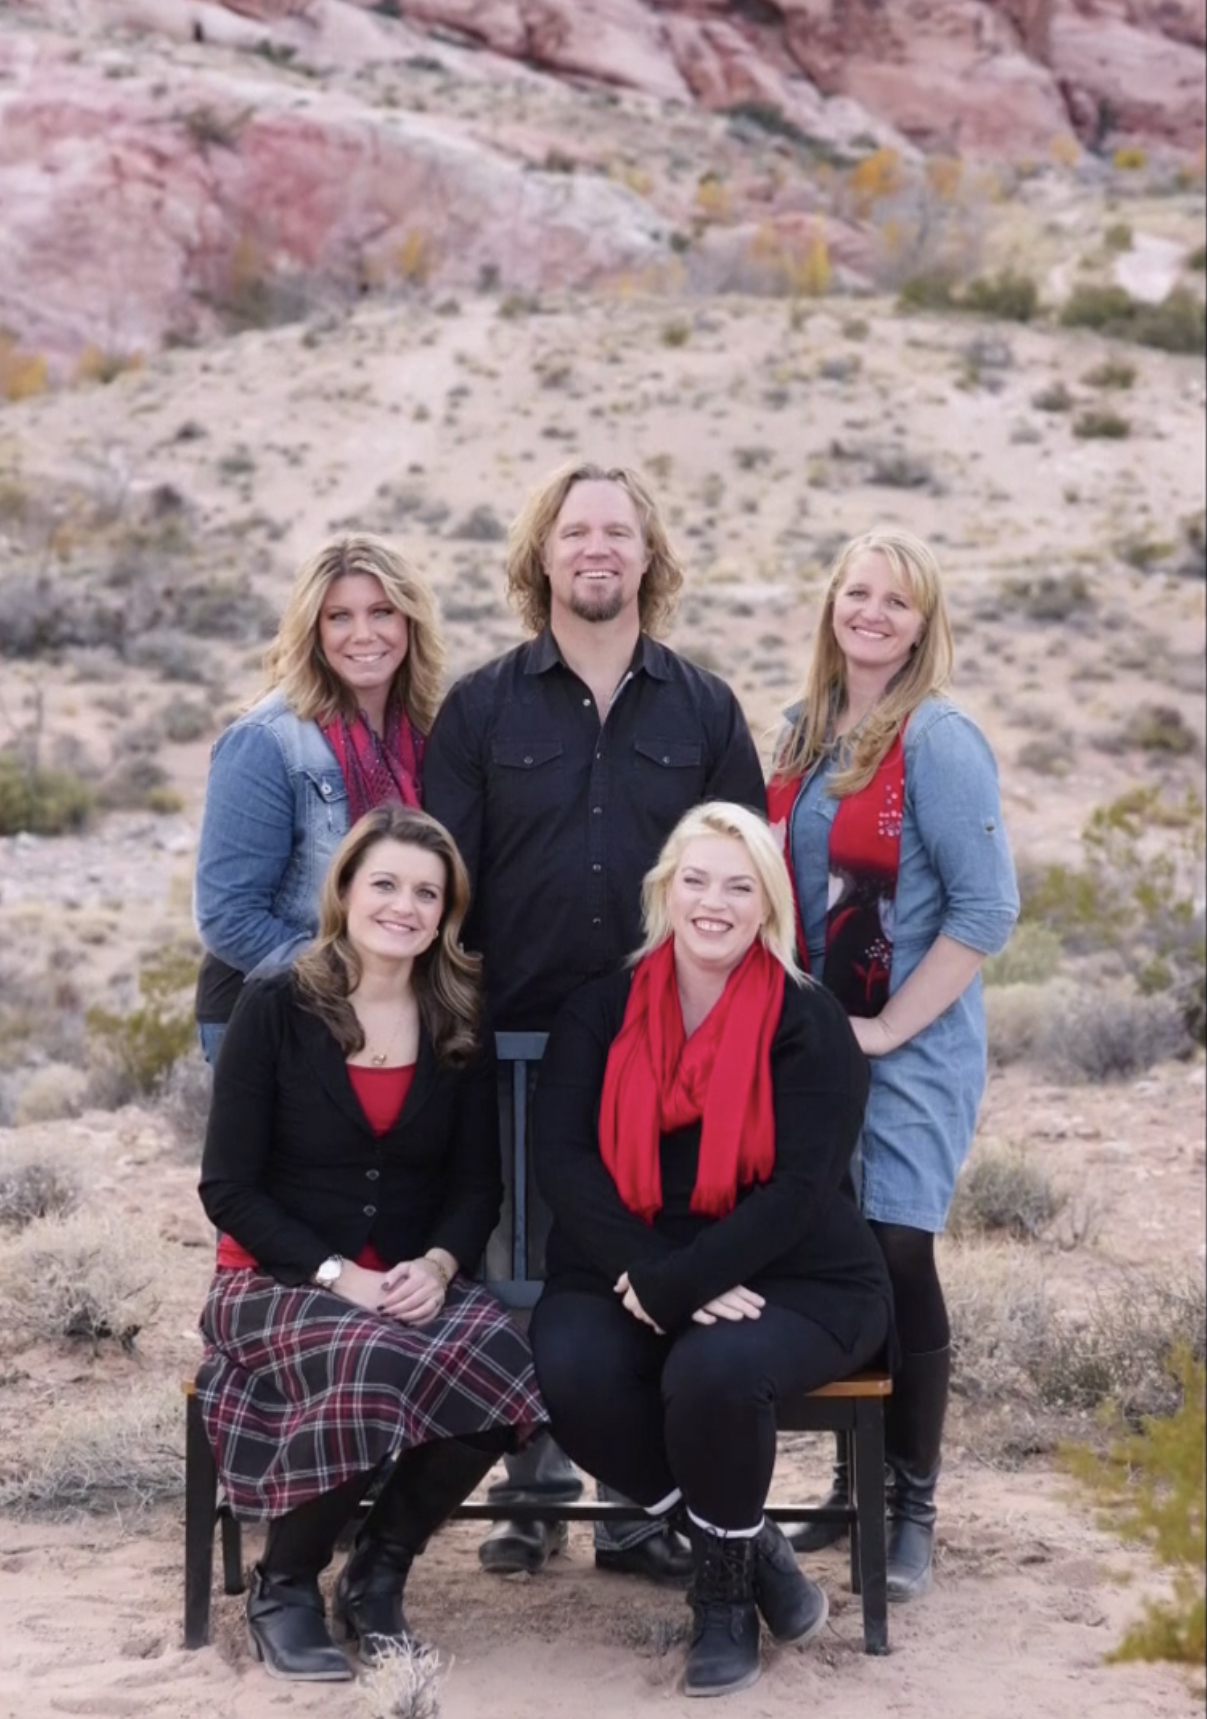 Kody Brown pictured with his four wives during happier times on the set of Sister Wives